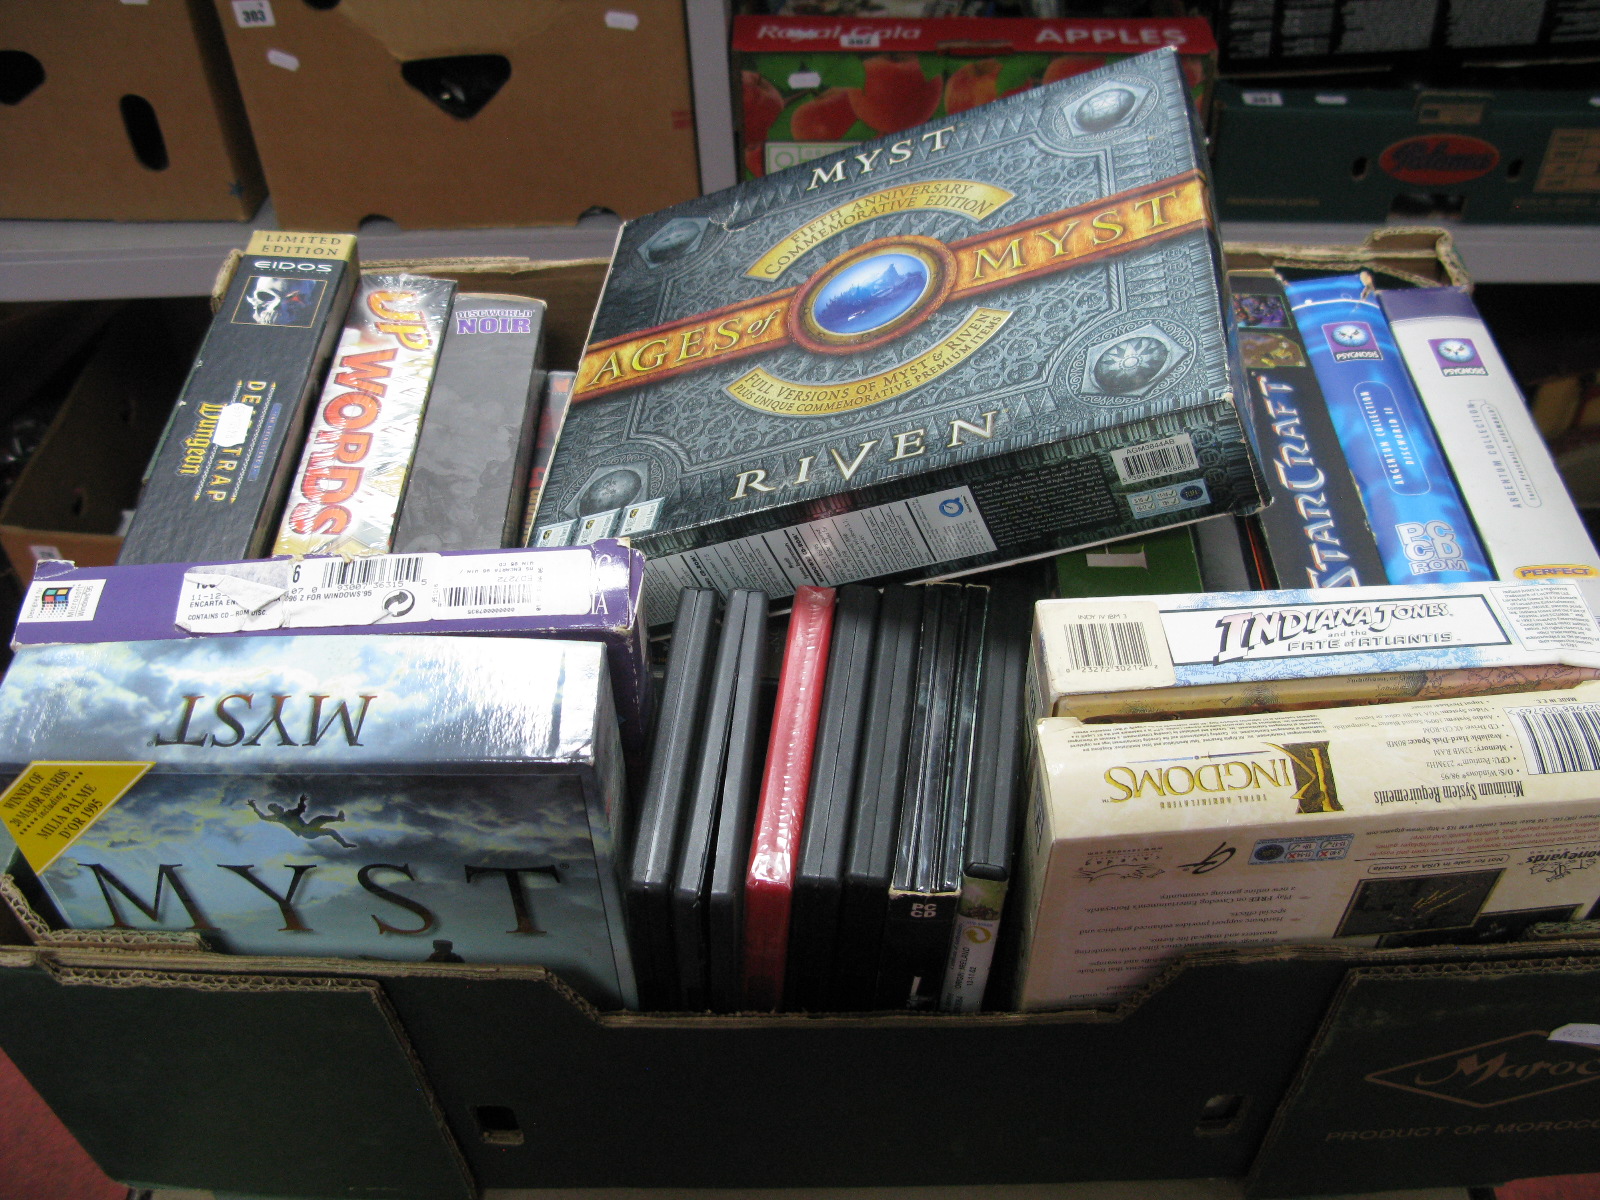 A Quantity of PC CD ROM/DVD ROM Games, including Half Life, 3D World Atals, Myst, Upwords, Hostile